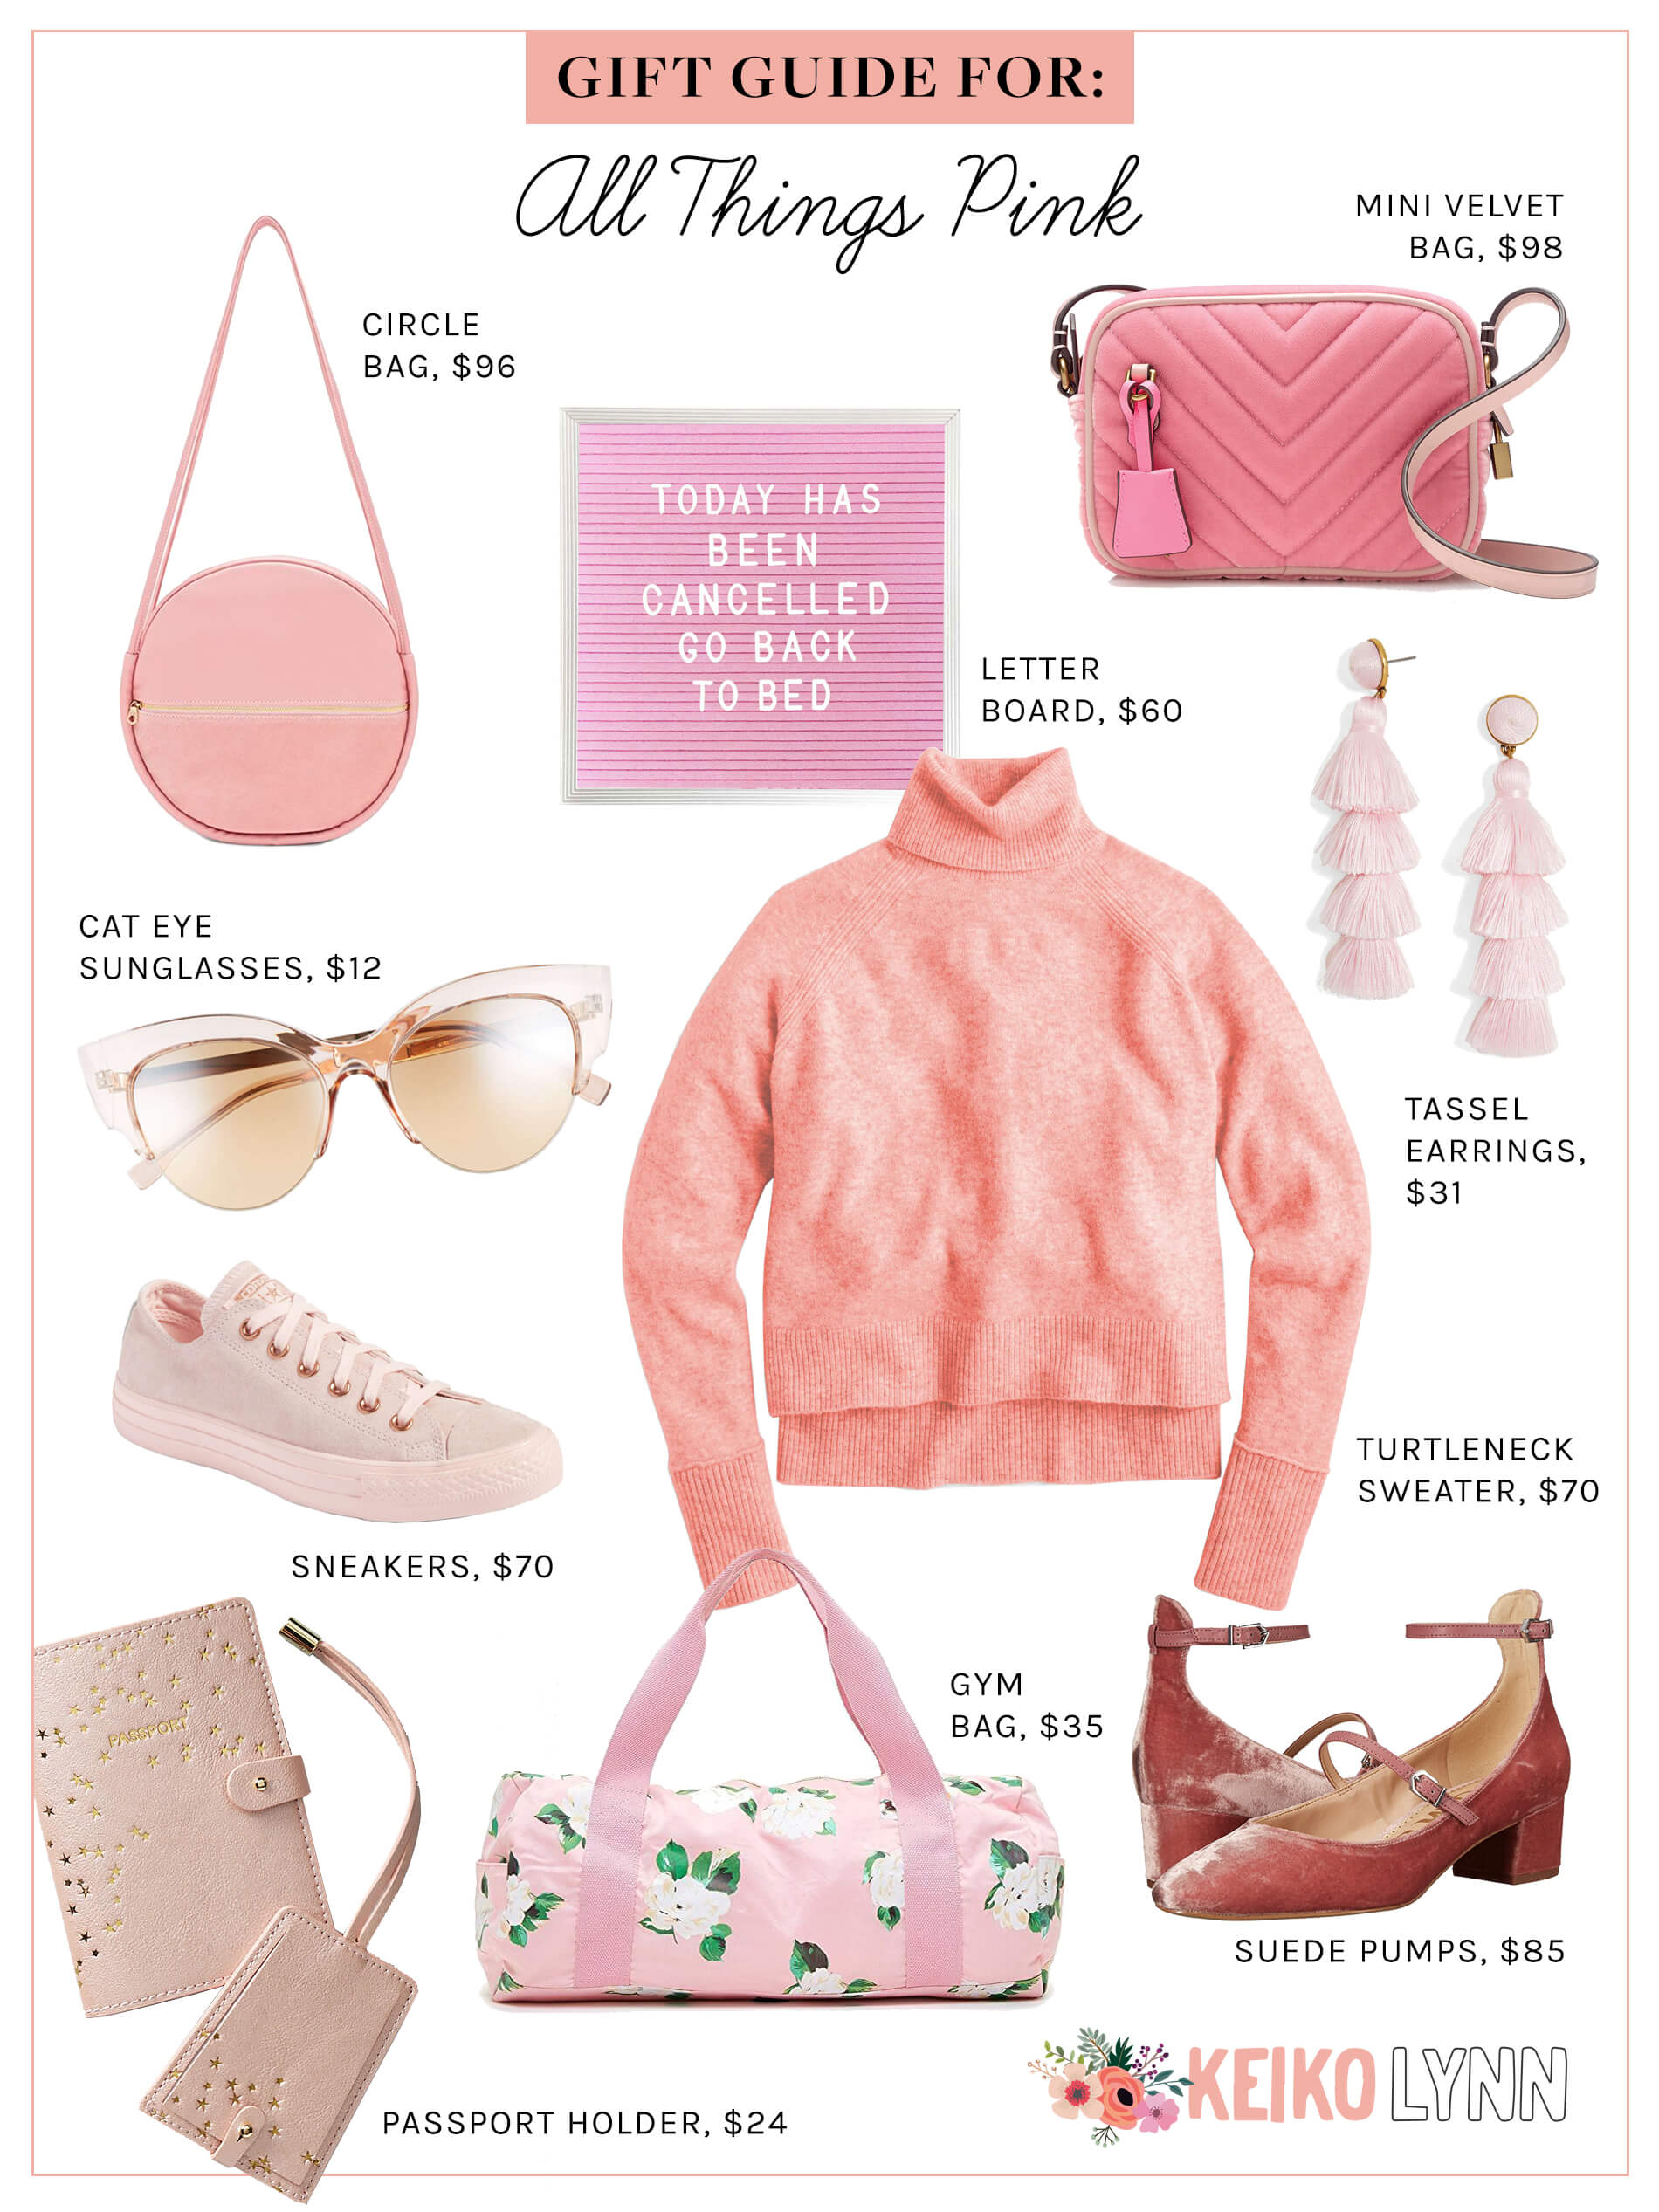 Gift Guide For All Things Pink - Millennial Pink Gift Ideas